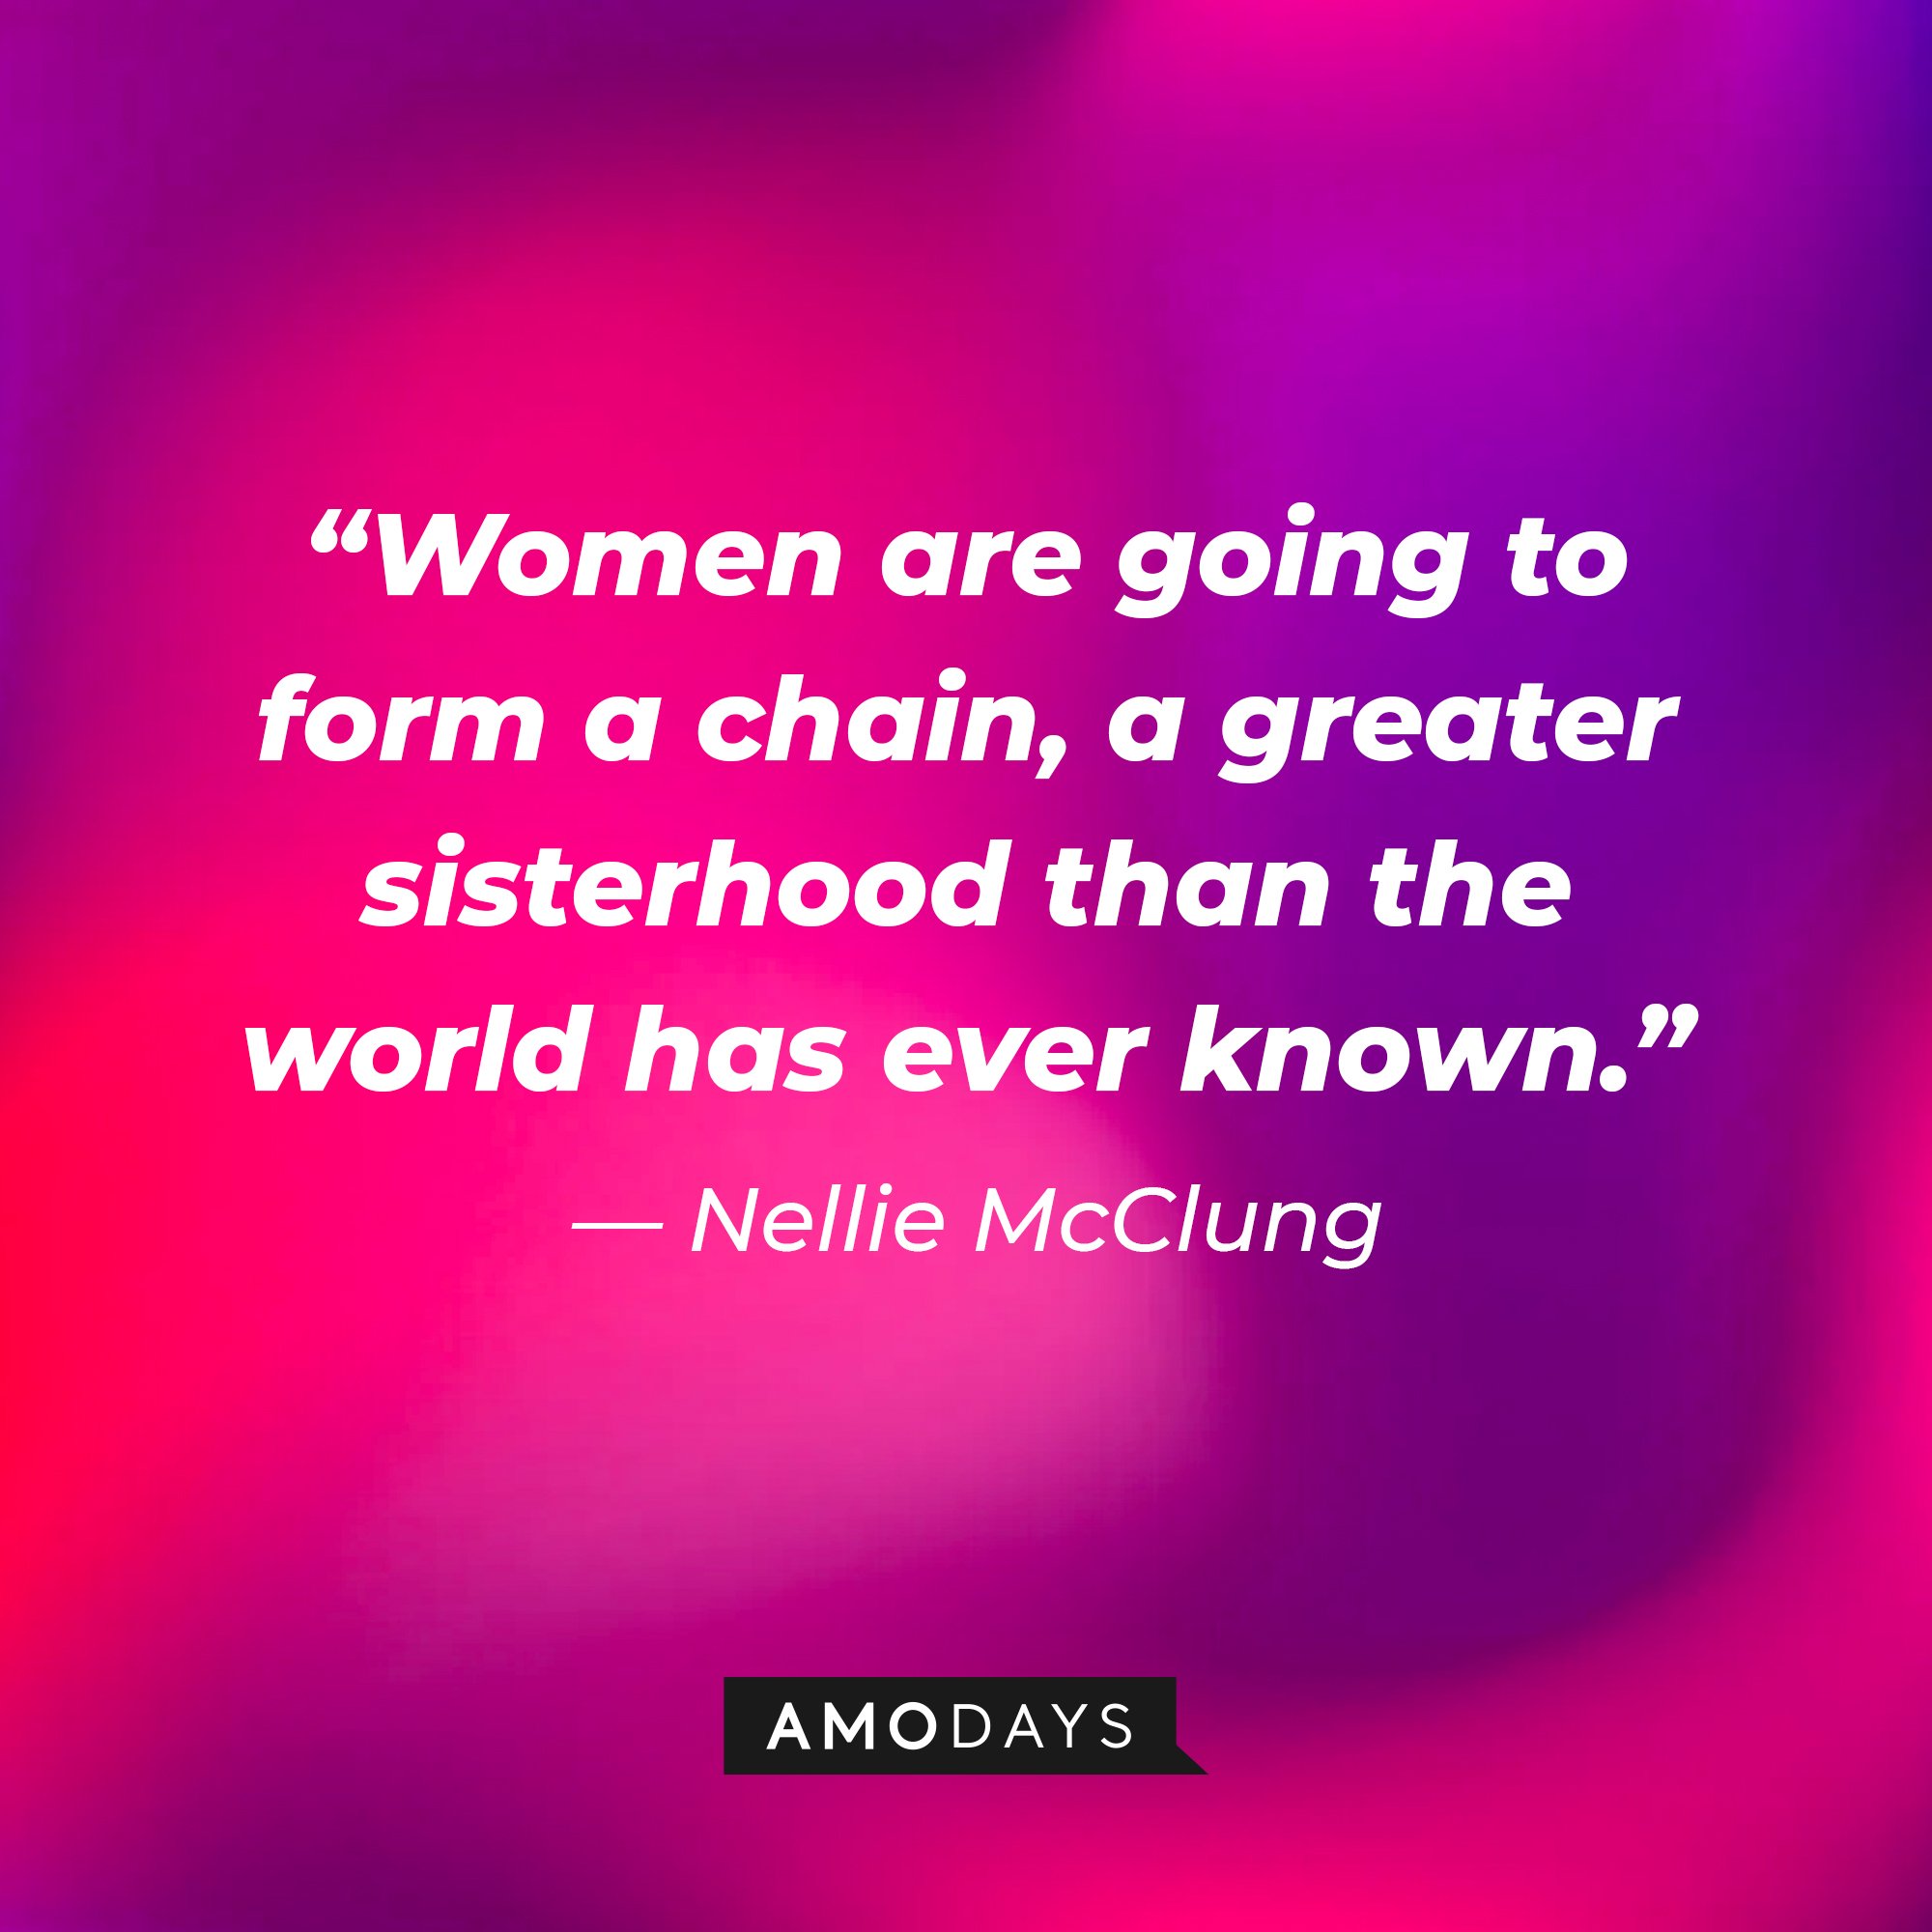 Nellie McClung’s quote: "Women are going to form a chain, a greater sisterhood than the world has ever known." | Image: AmoDays